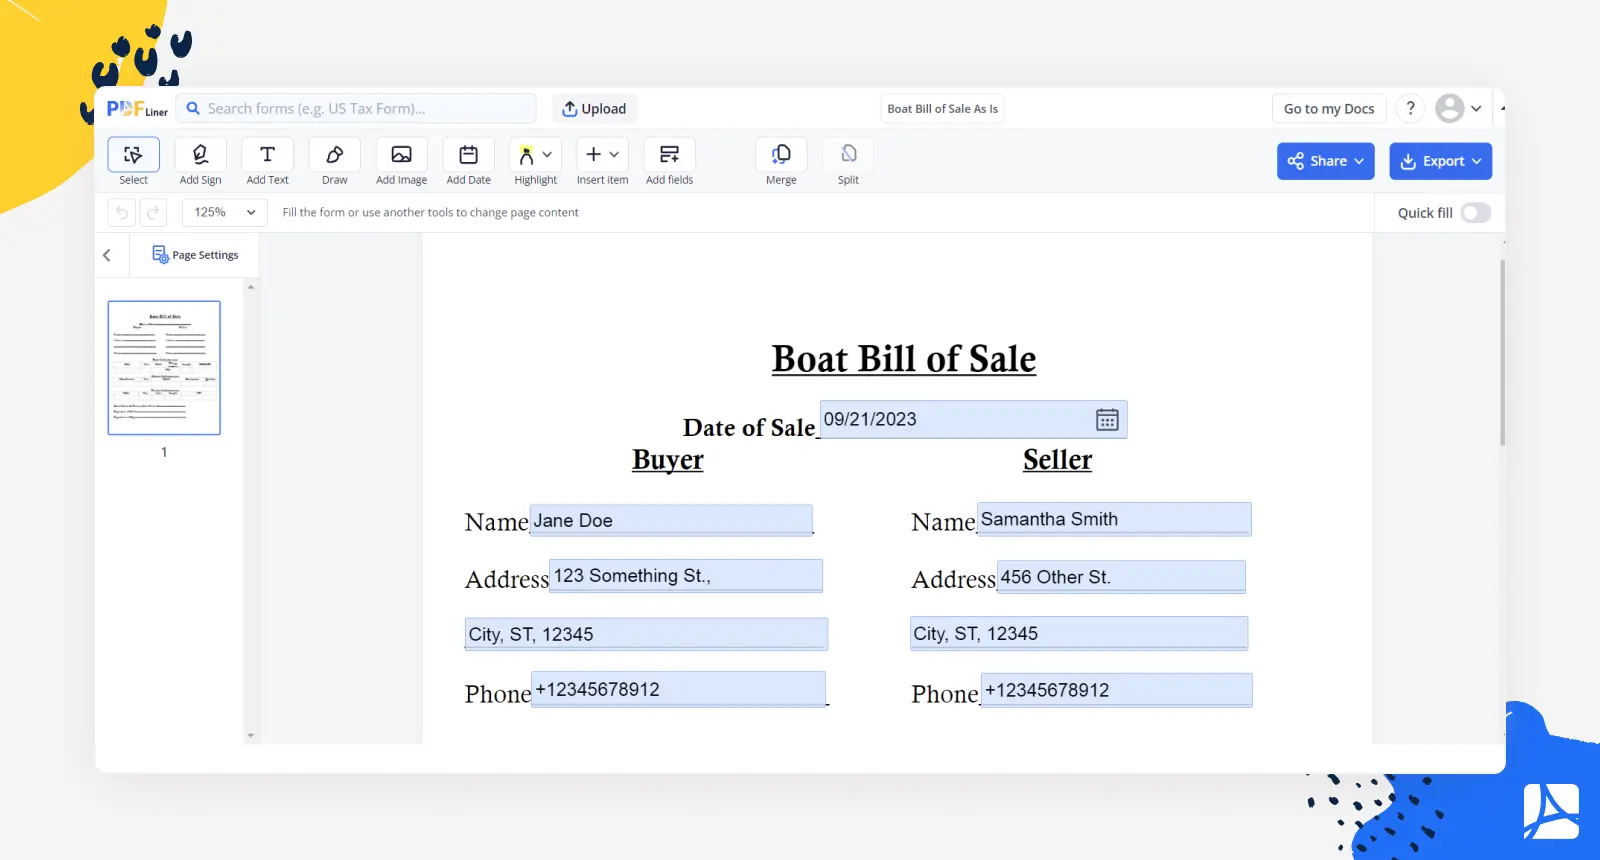 Boat Bill of Sale example